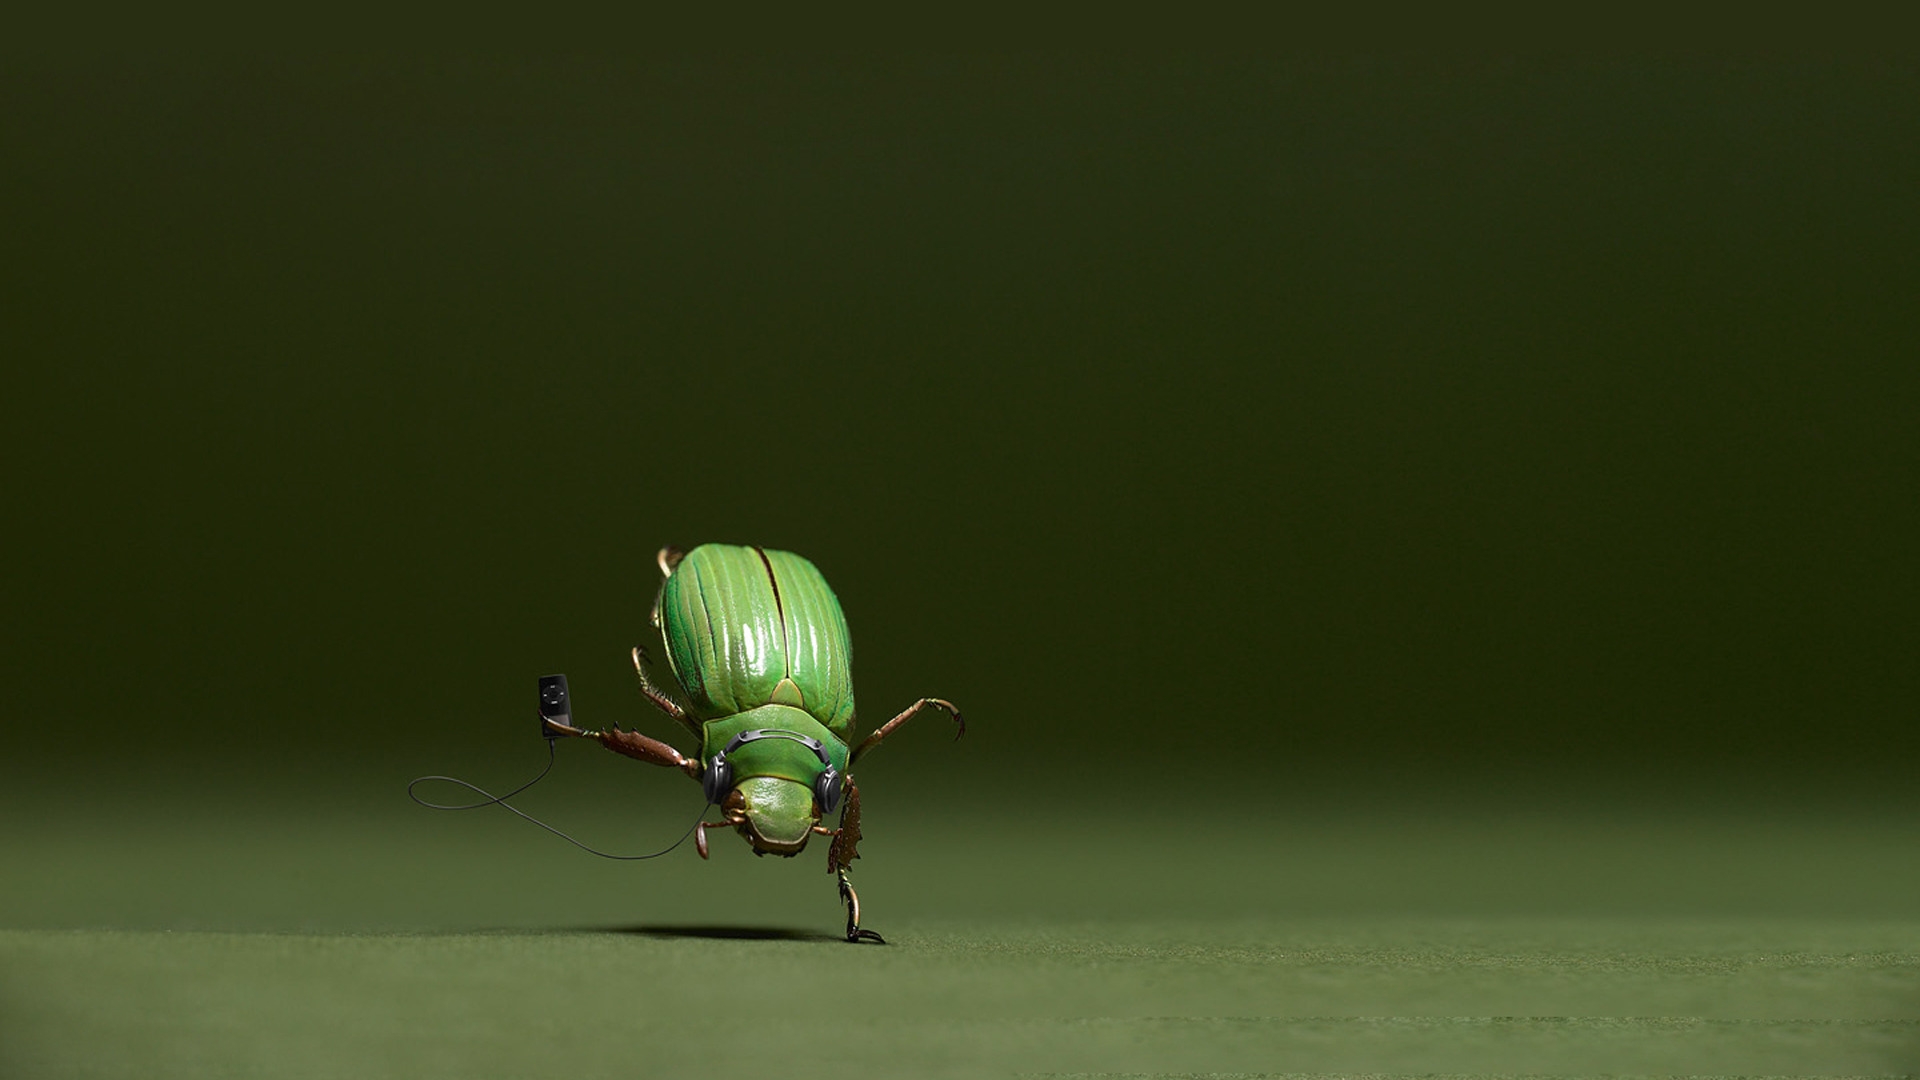 Dancing Bug for 1920 x 1080 HDTV 1080p resolution